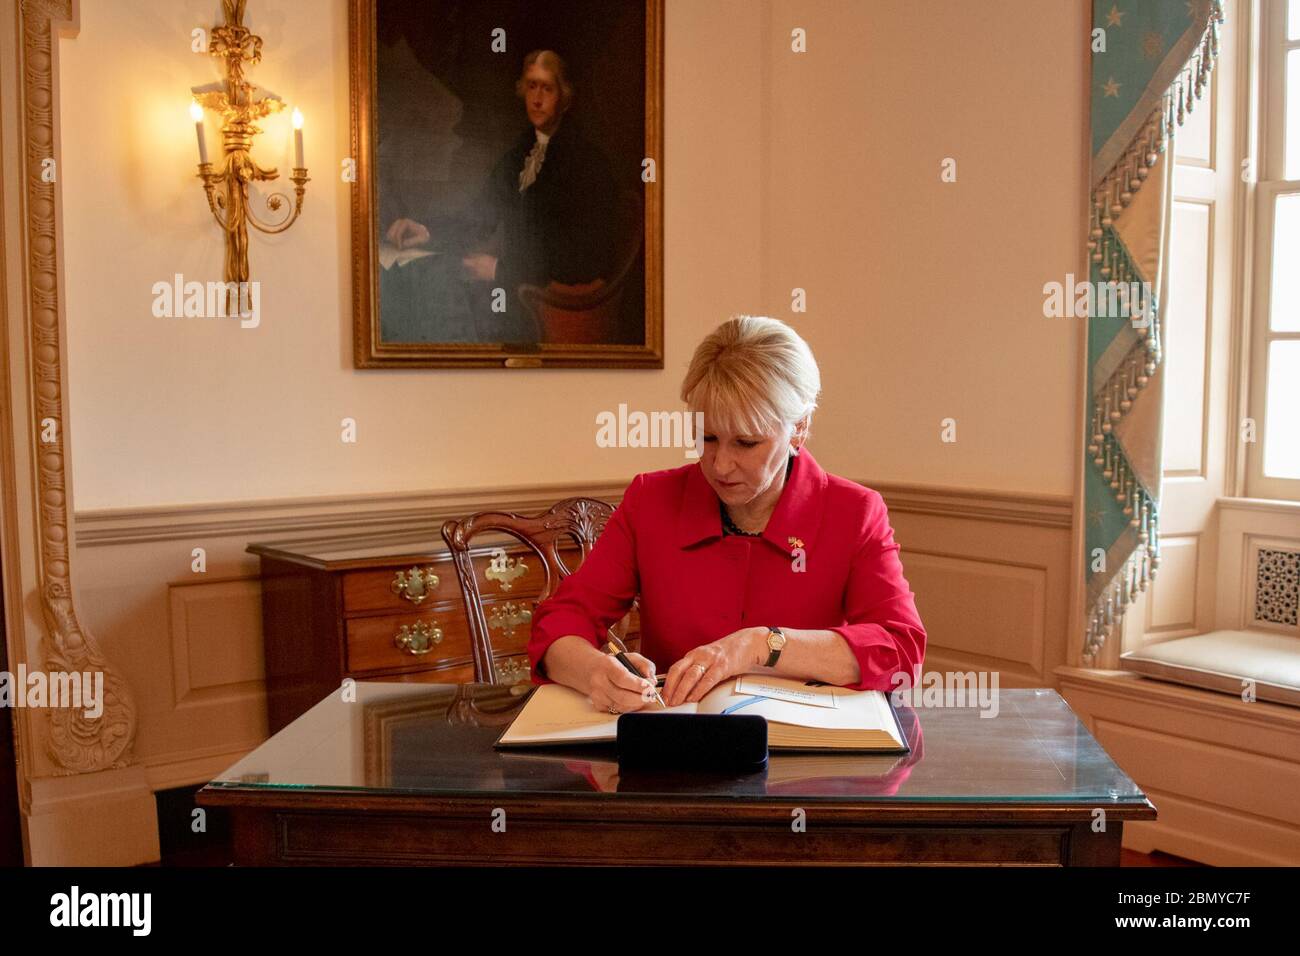 Swedish Foreign Minister Wallstrom Signs Secretary Pompeo's Guestbook Swedish Foreign Minister Margot Wallstrom signs Secretary Pompeo's guestbook before their meeting at the U.S. Department of State in Washington, D.C., on April 29, 2019. Stock Photo